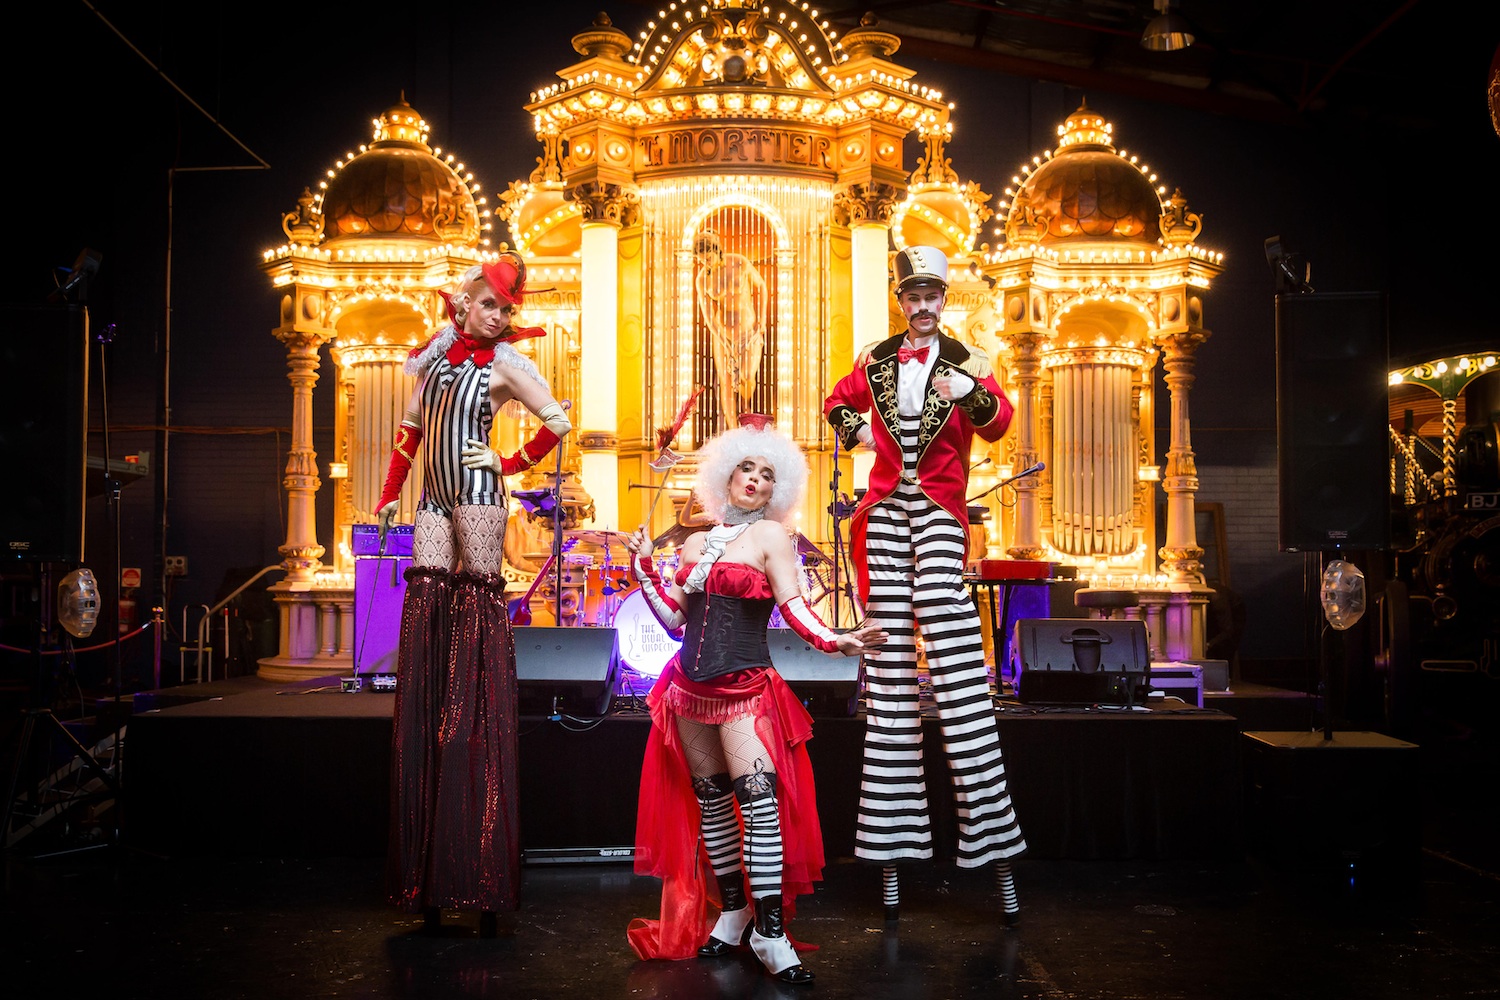 Stilt Costumes with Candy Stripe Circus Ring Mistress and Ring Master on Stilts